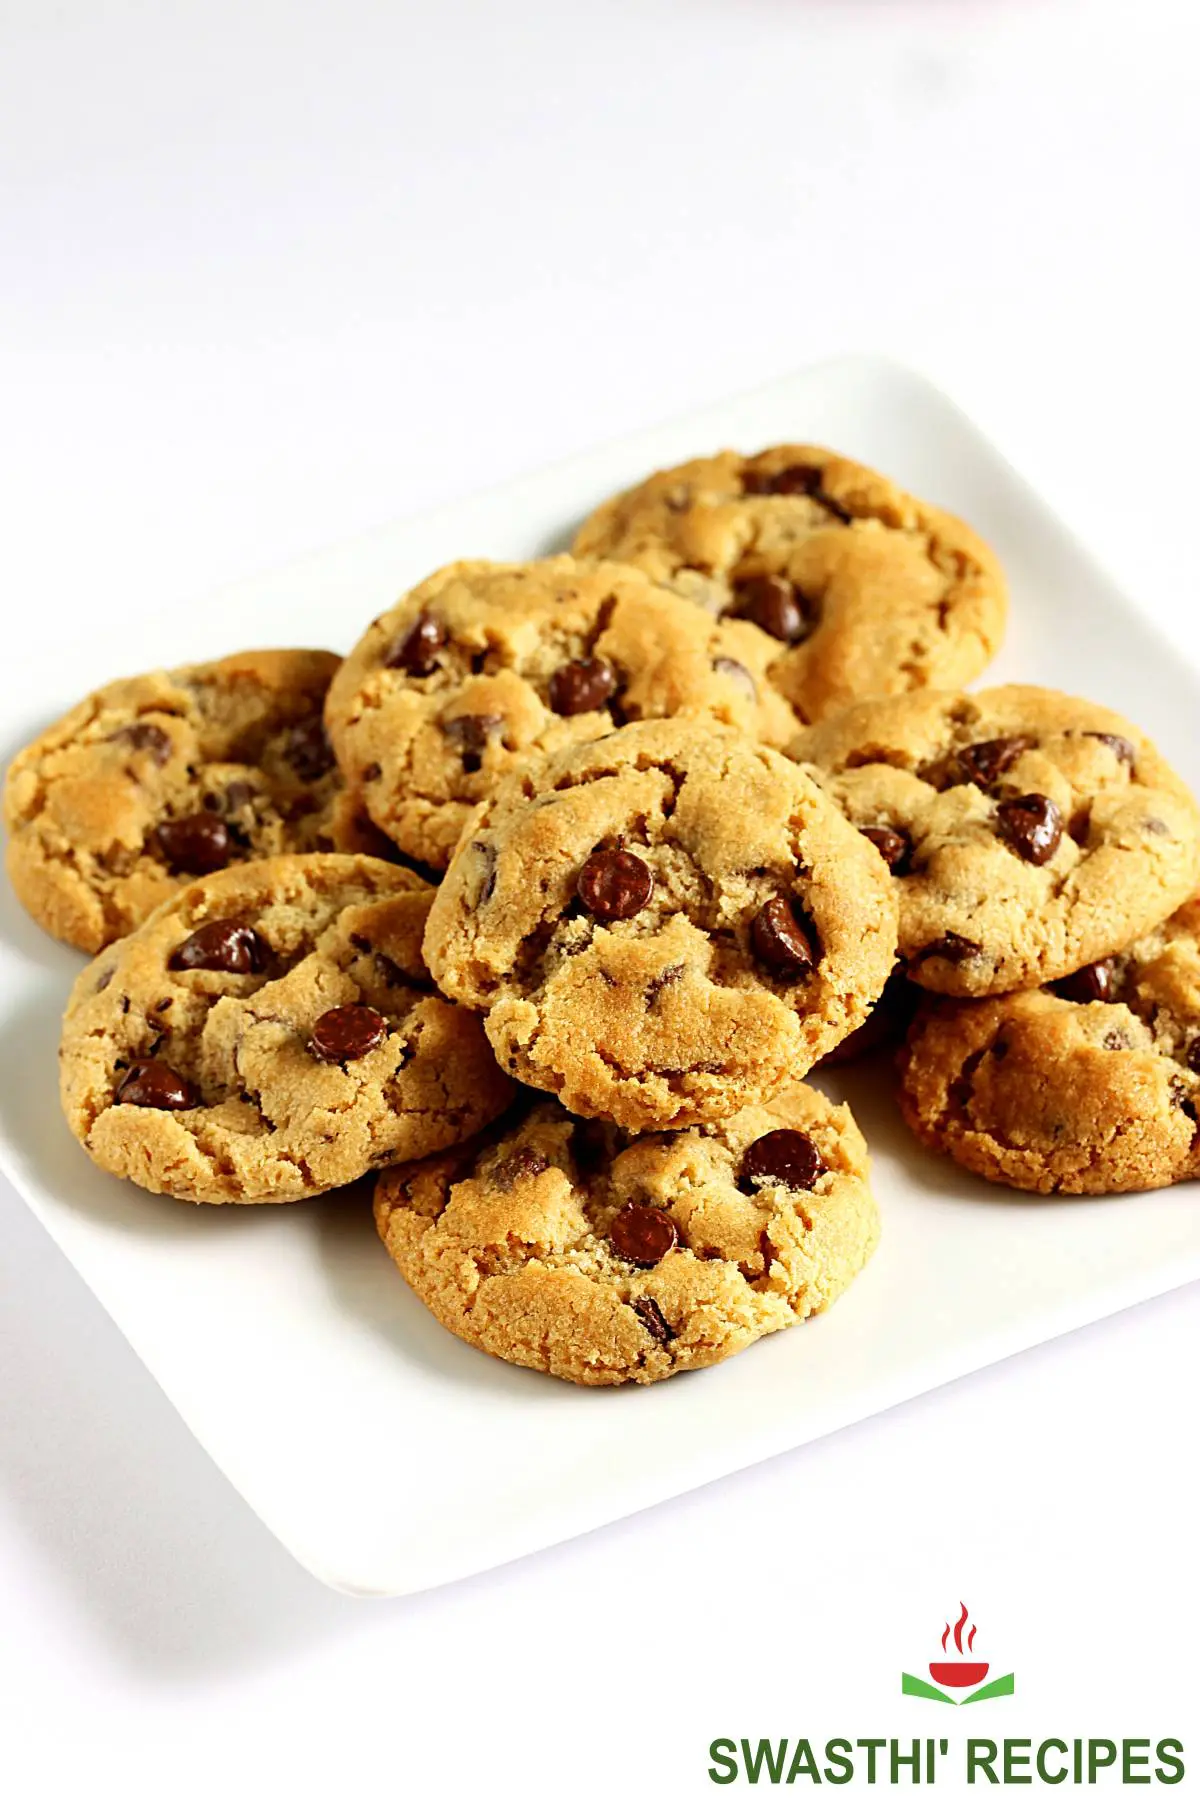 https://www.indianhealthyrecipes.com/wp-content/uploads/2021/05/eggless-chocolate-chip-cookies.jpg.webp